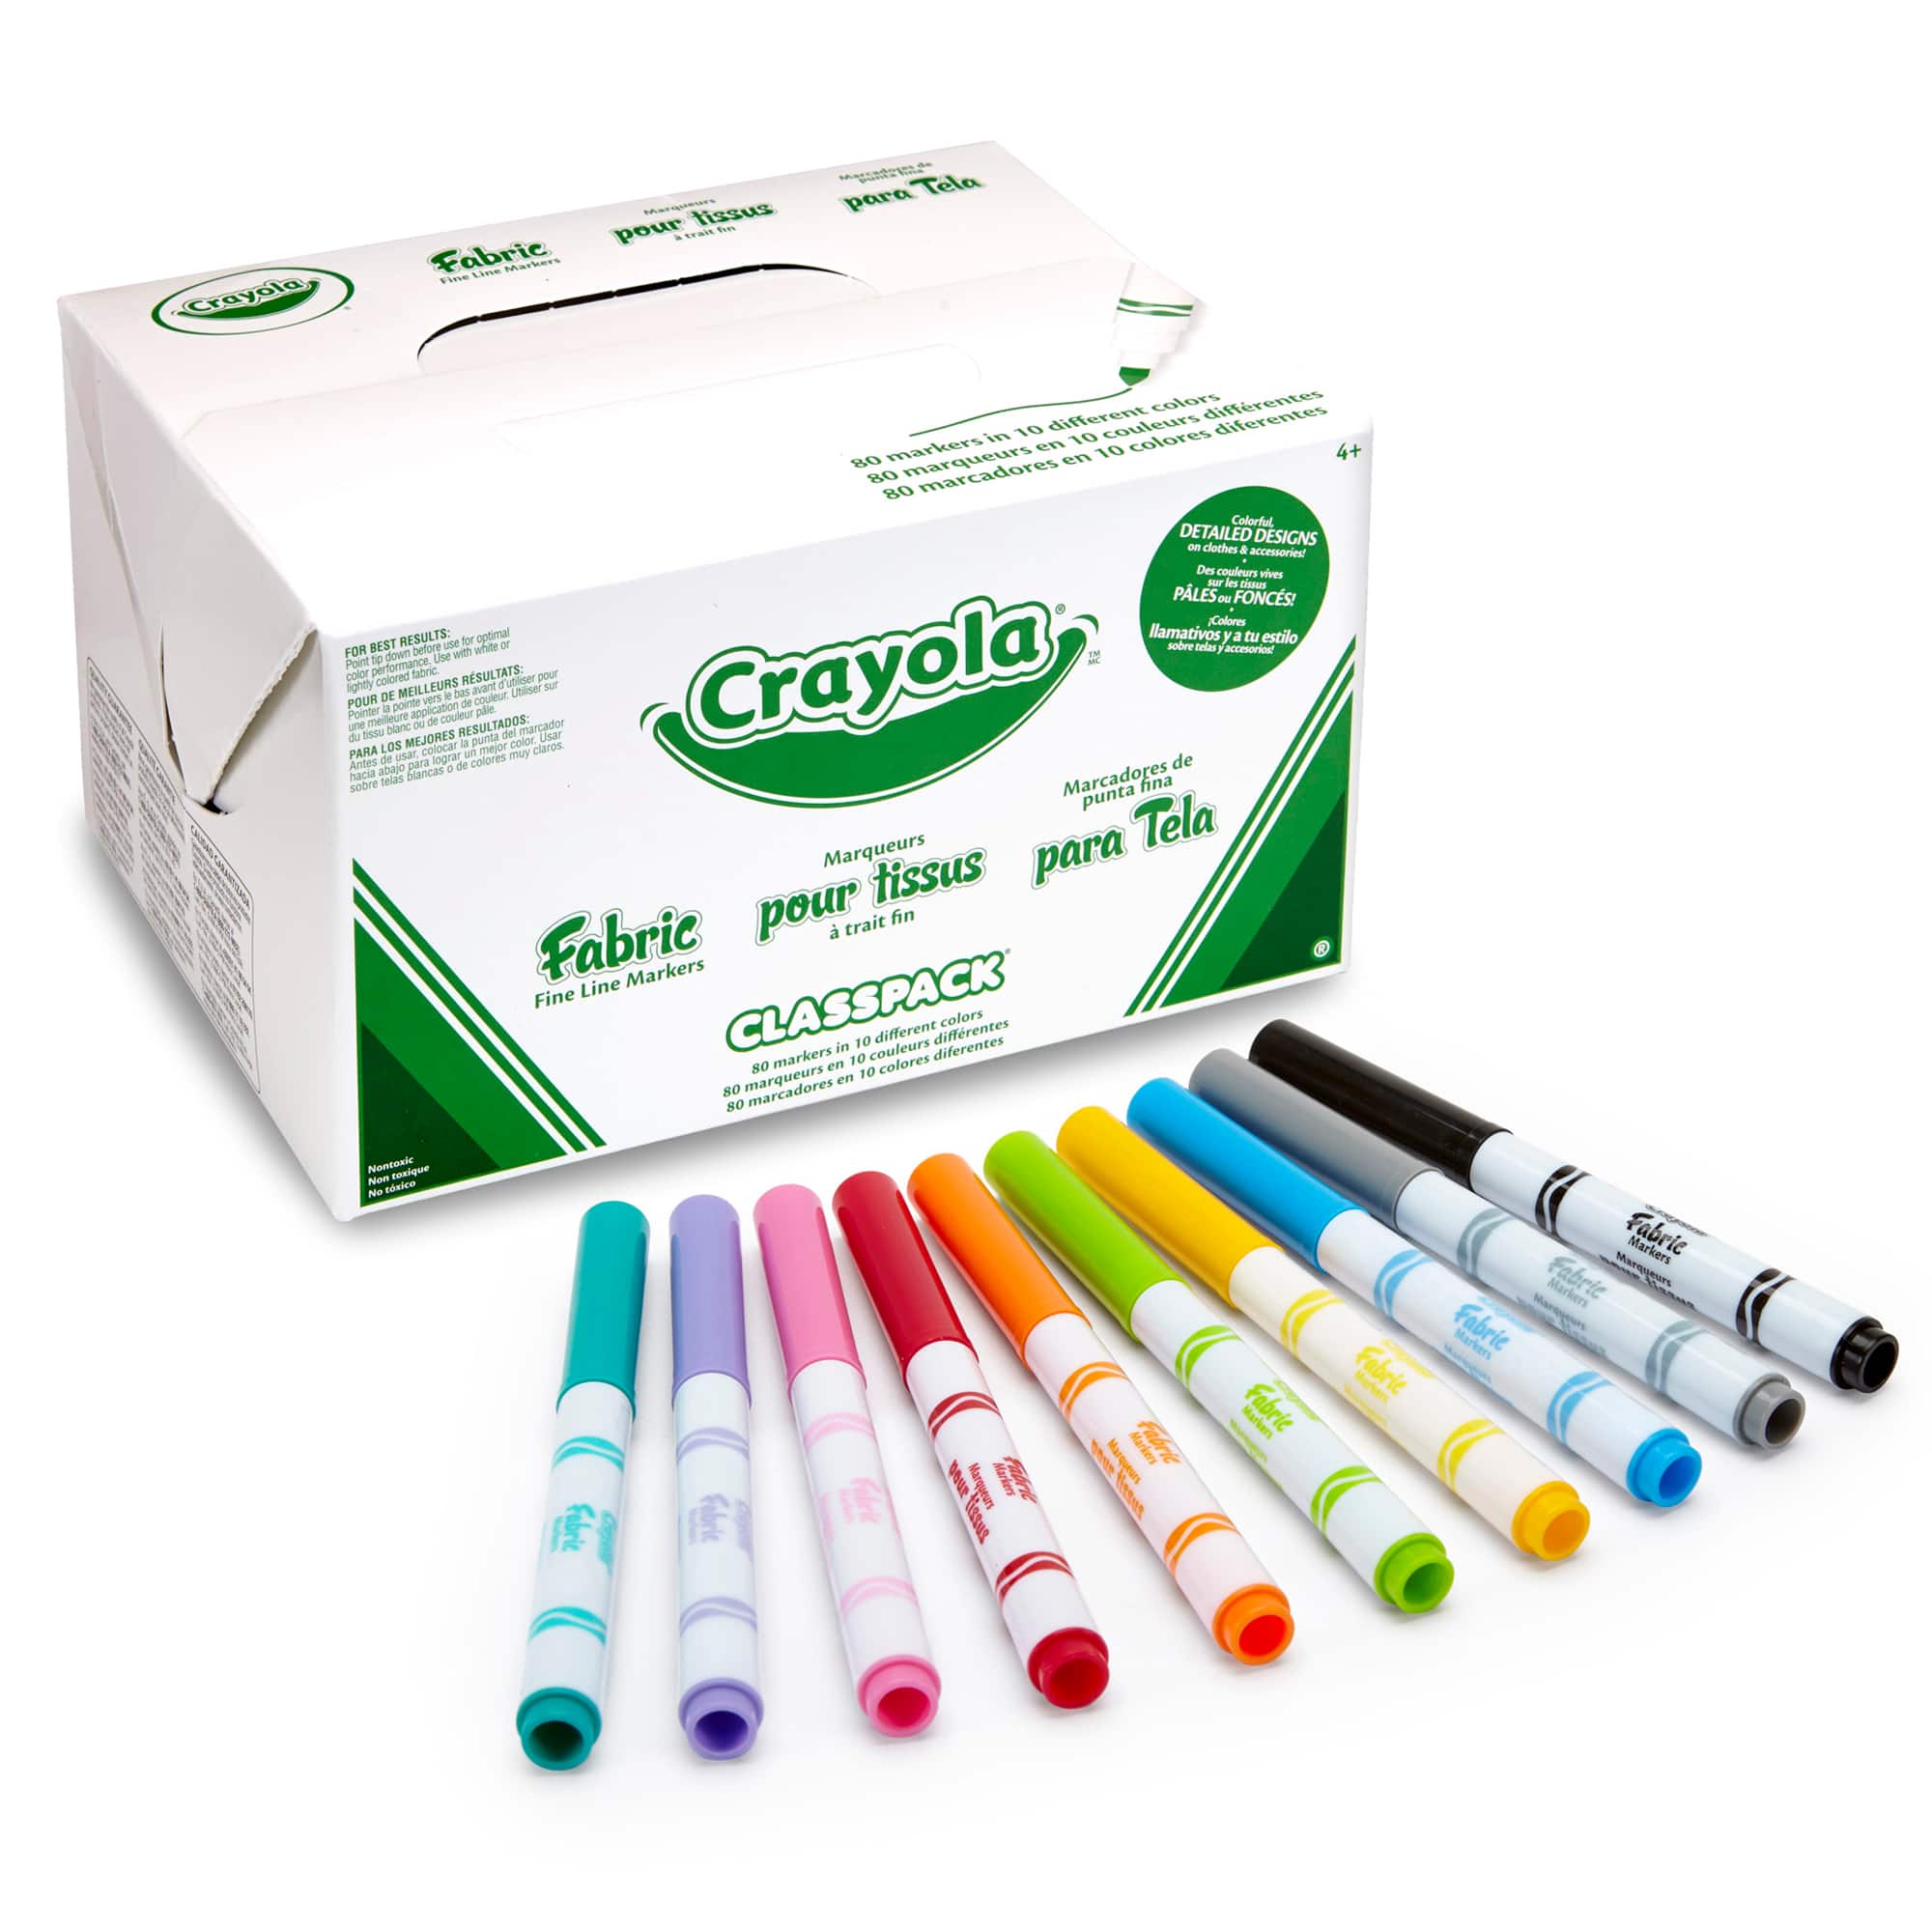 6 Packs: 80 ct. (480 total) Crayola® Fabric Markers | Michaels